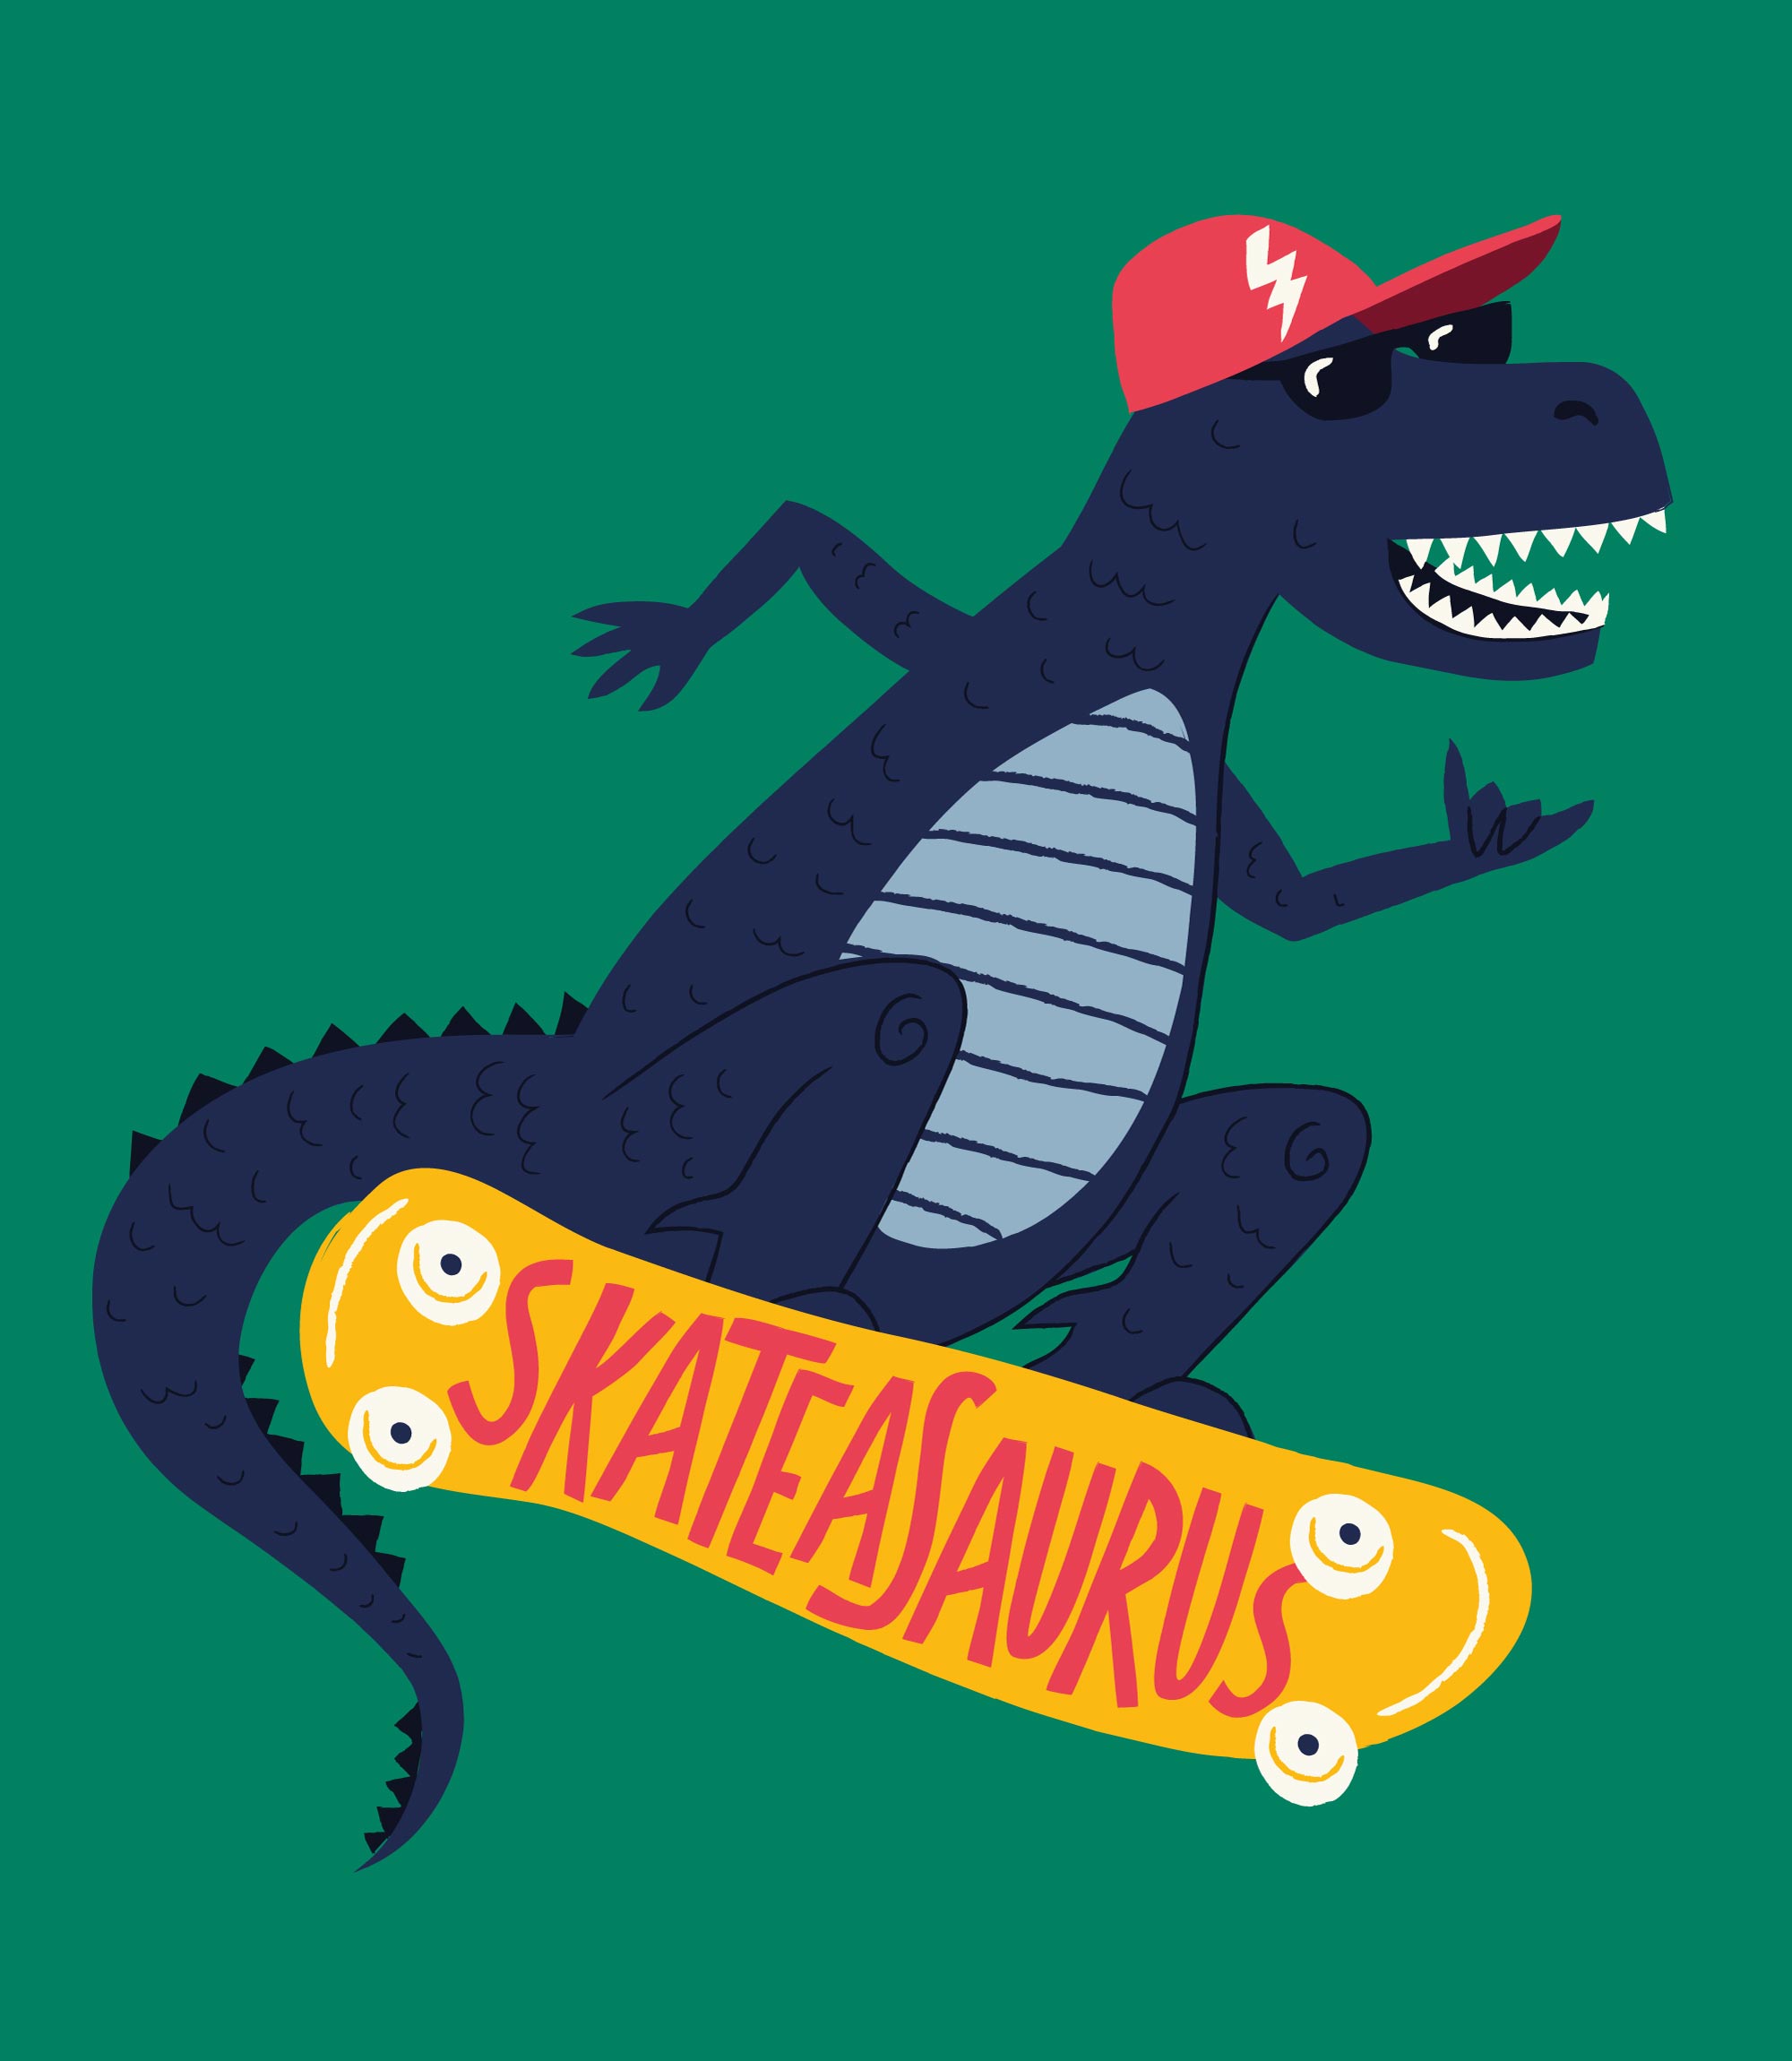 Skateasaurus Tee for Joules by Elly Jahnz